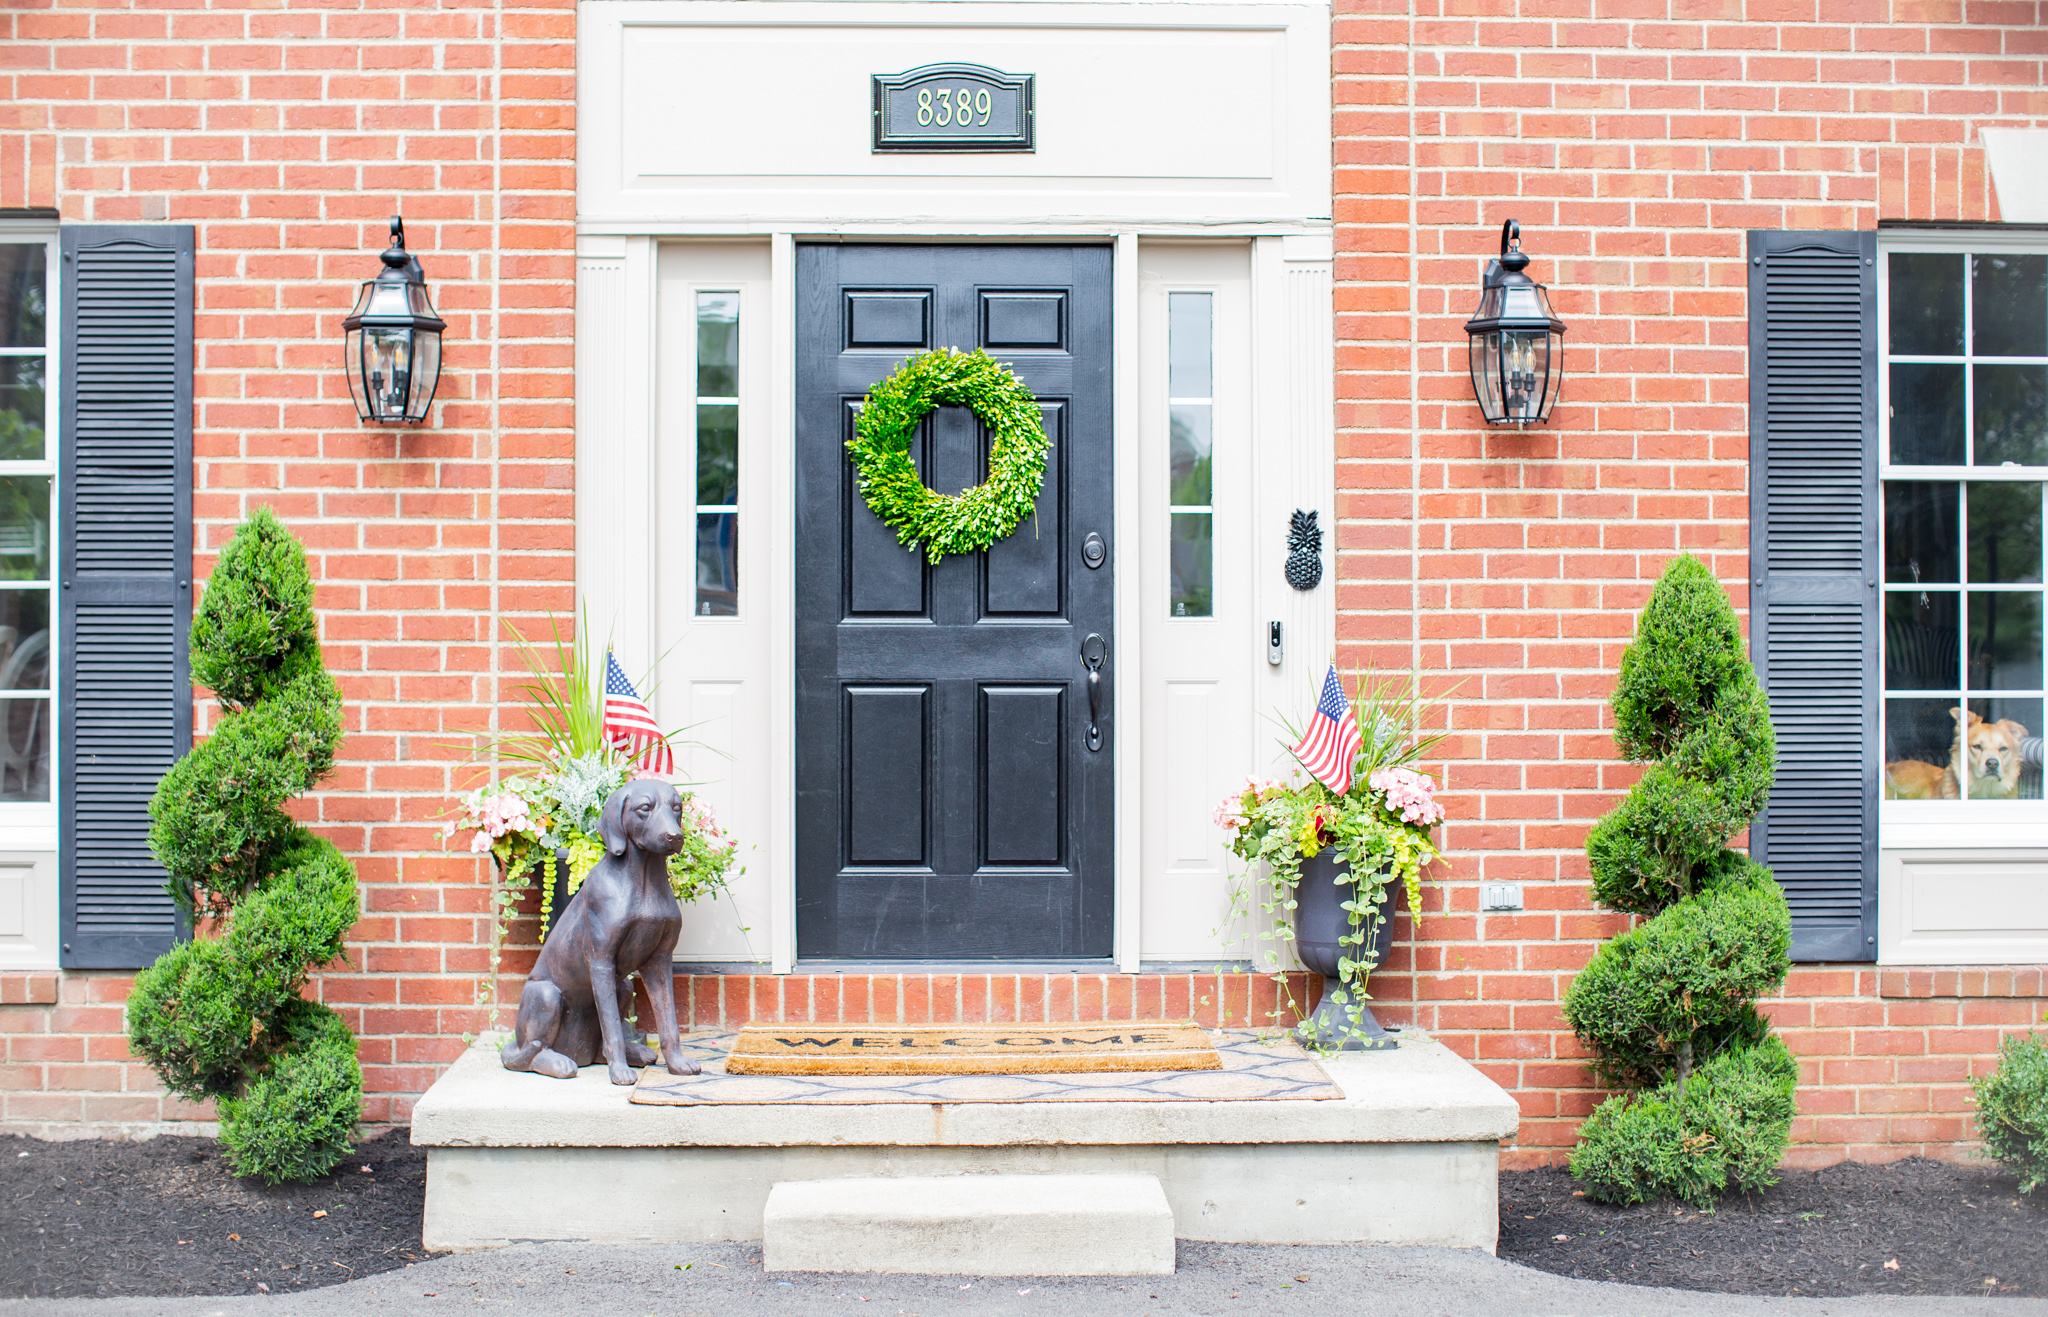 Front Porch by popular Ohio life and style blog, Coffee Beans and Bobby Pins: image of the front of a house decorated with American Flag bunting, Grandin Road Labrador Garden Statue, Grandin Road Hypnos Quatrefoil Outdoor Rug, Grandin Road Welcome Stripe Coir Door Mat, Grandin Road Sidney Urn/Planter, Grandin Road Soft Vine Wreath, Grandin Road Large Cambridge Single Line Wall Address Plaque, Grandin Road Devon Self-watering Window Box Planter, and Grandin Road Devon Tapered Planter.